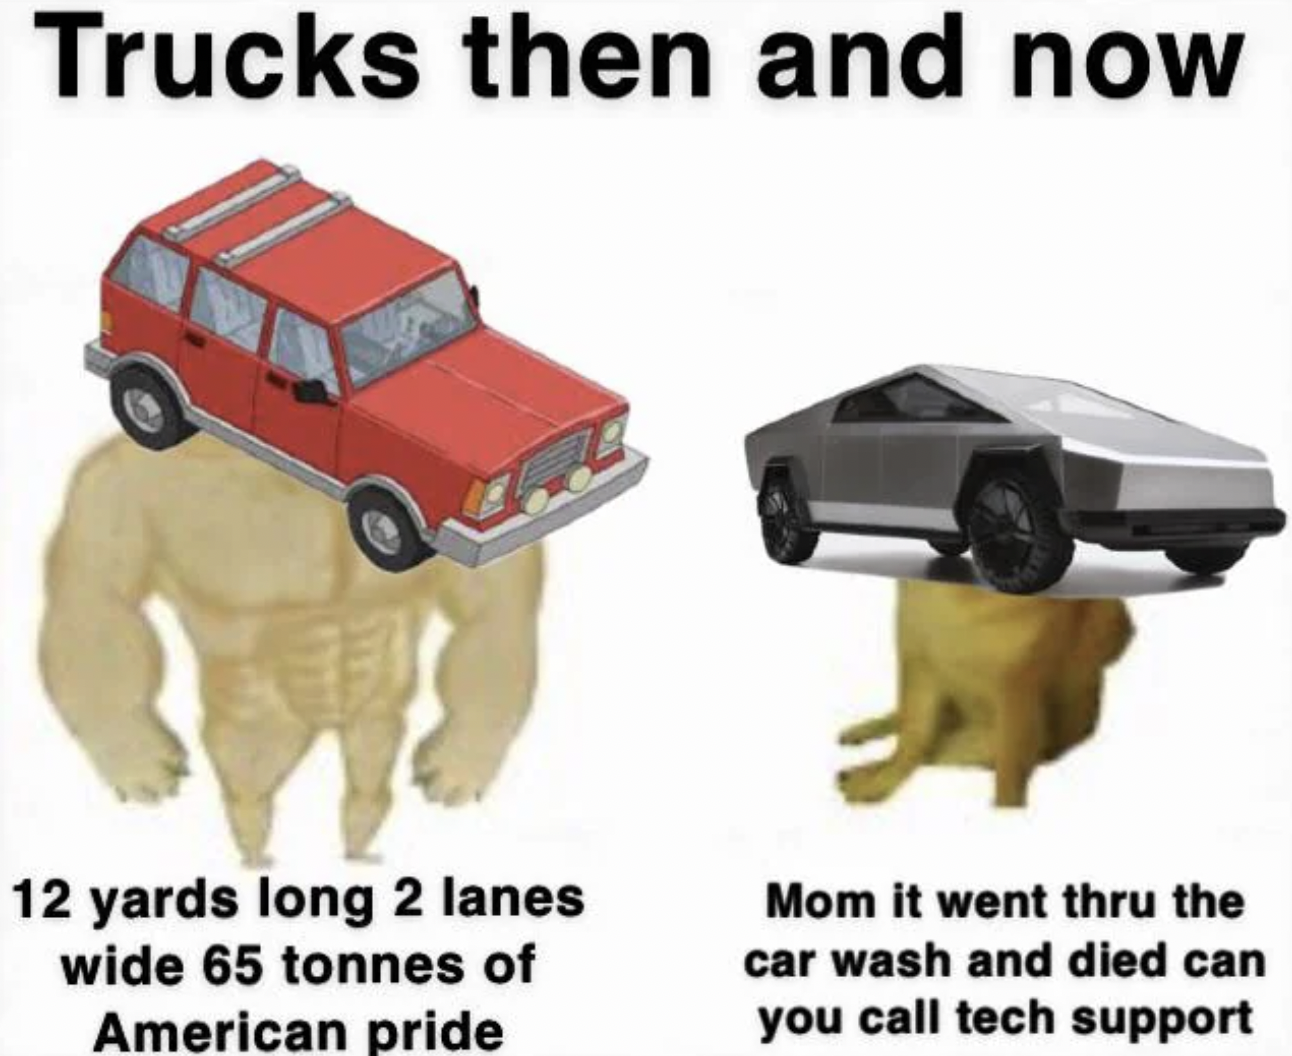 Meme - Trucks then and now 12 yards long 2 lanes wide 65 tonnes of American pride Mom it went thru the car wash and died can you call tech support